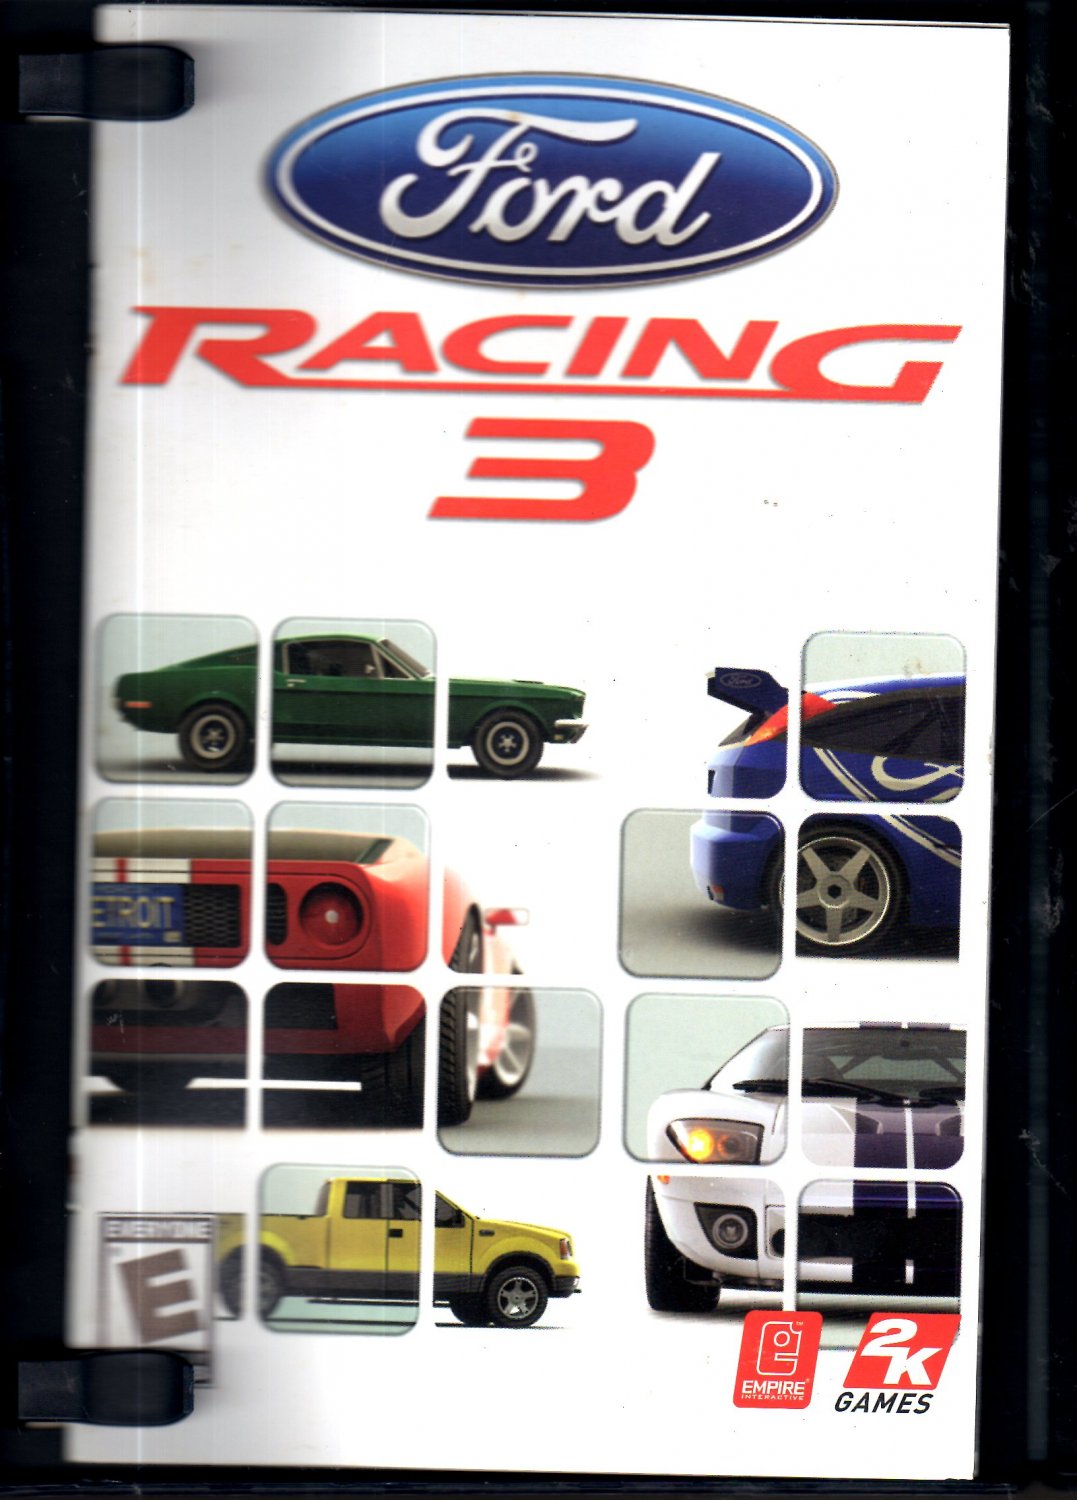 Ford racing 3 steam фото 66